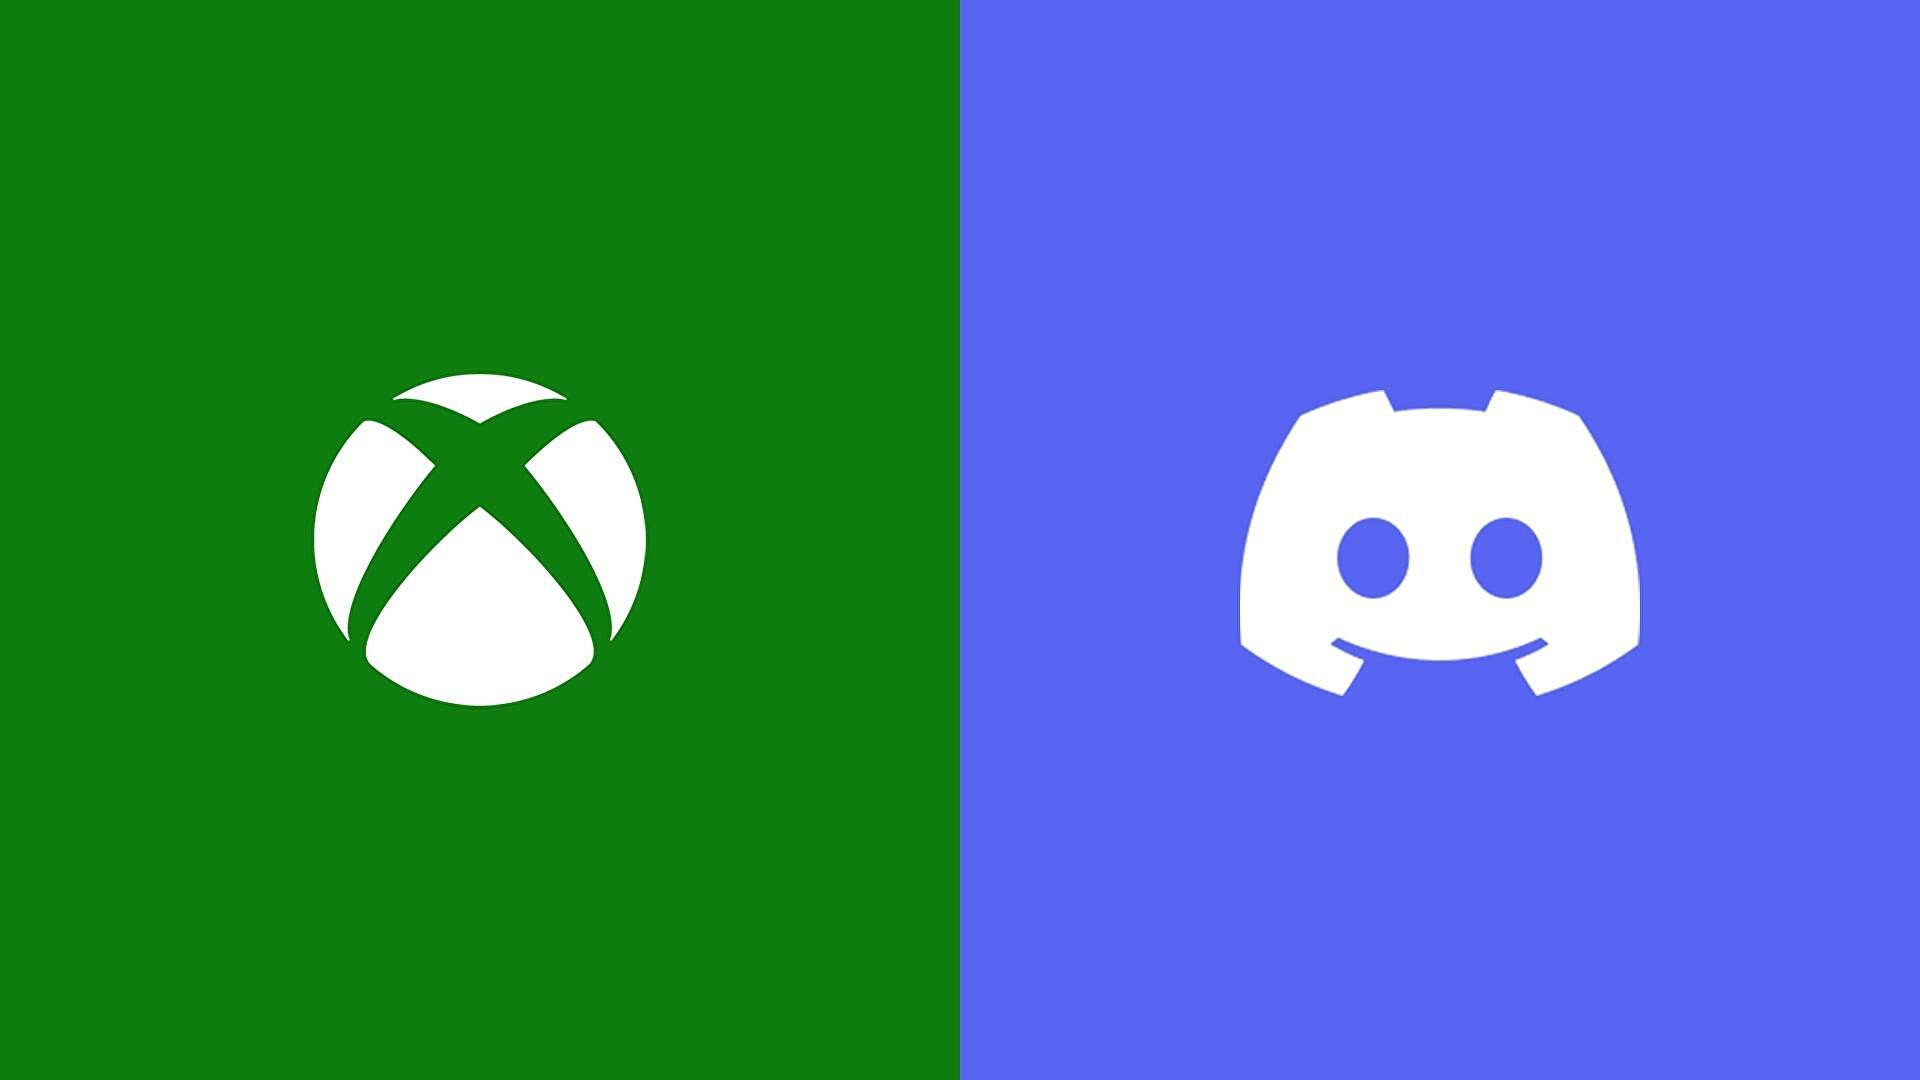 Using Discord voice on Xbox is now a reality, even if the process is a bit clunky